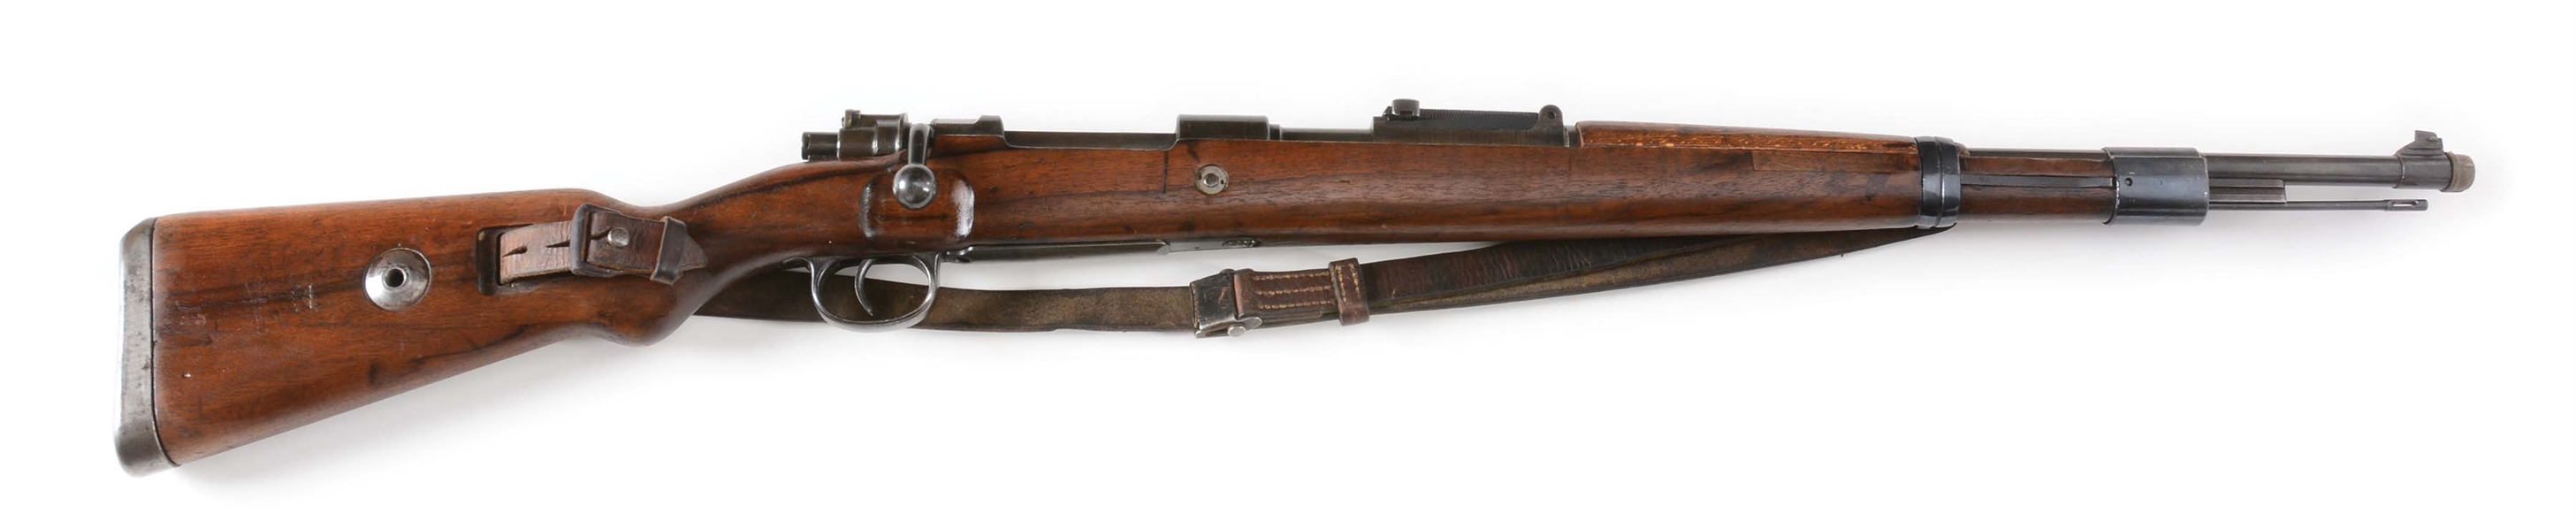 (C) SS MARKED STEYR DAIMLER PUCH 98K BOLT ACTION RIFLE.